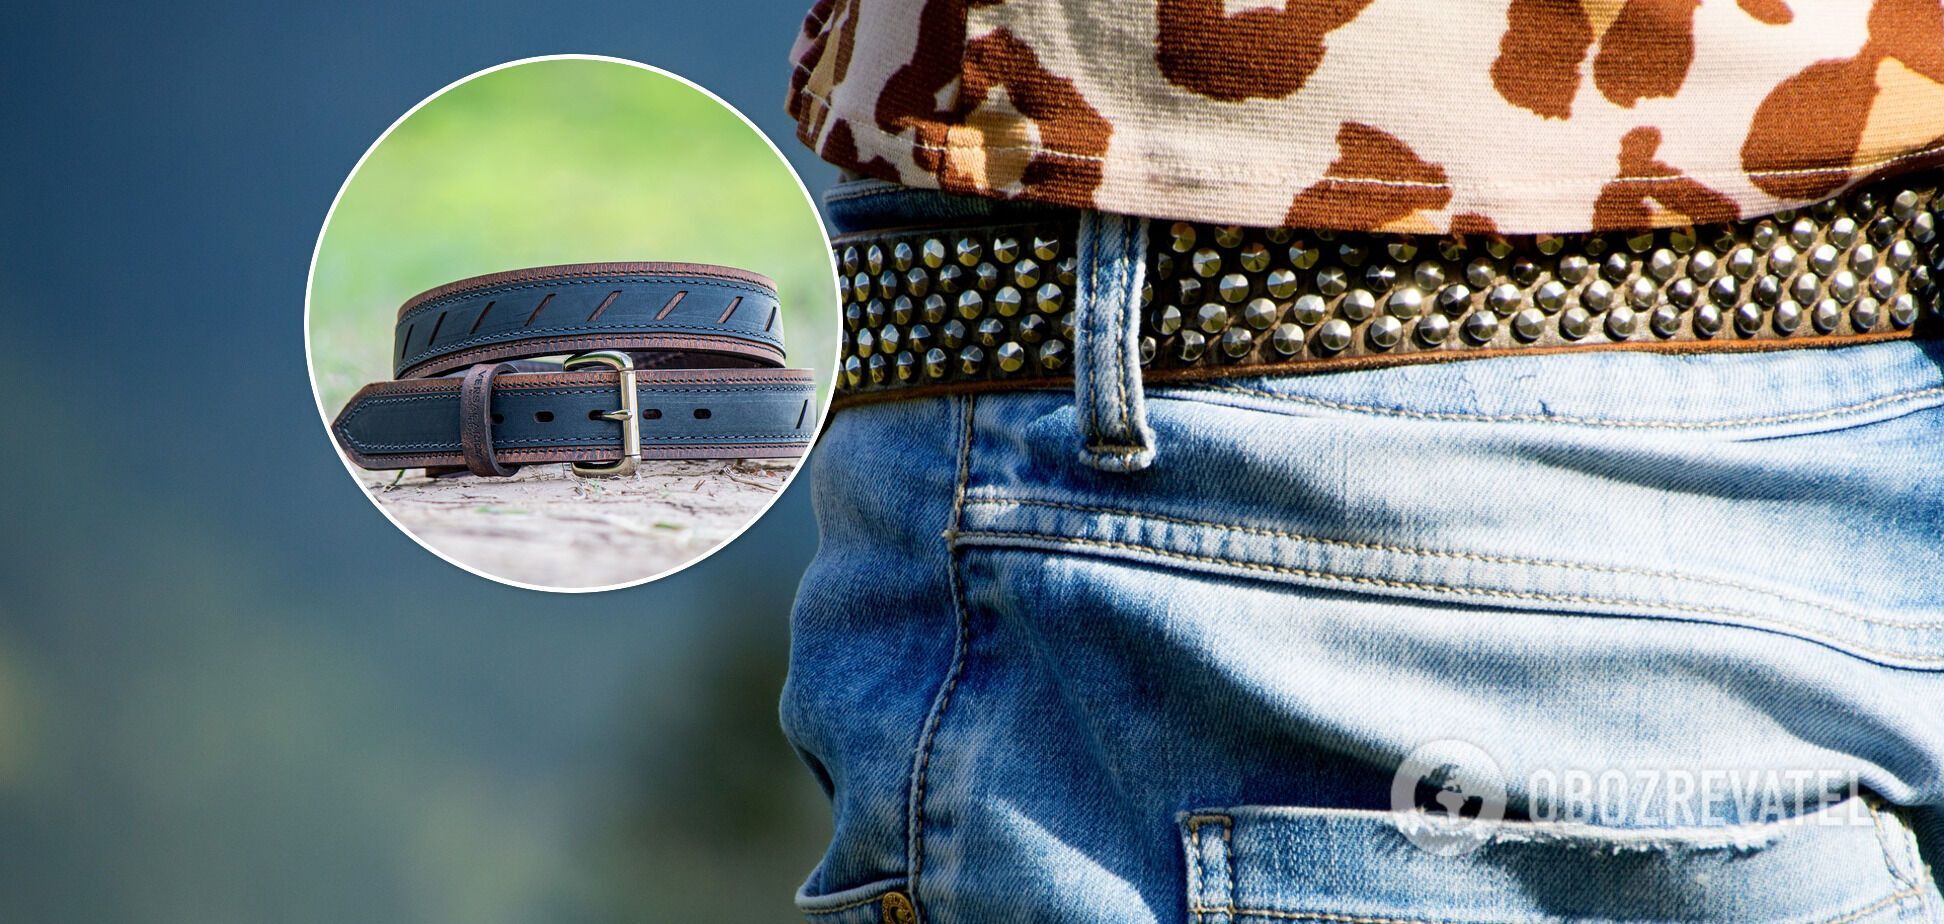 Belts should be chosen with trousers.